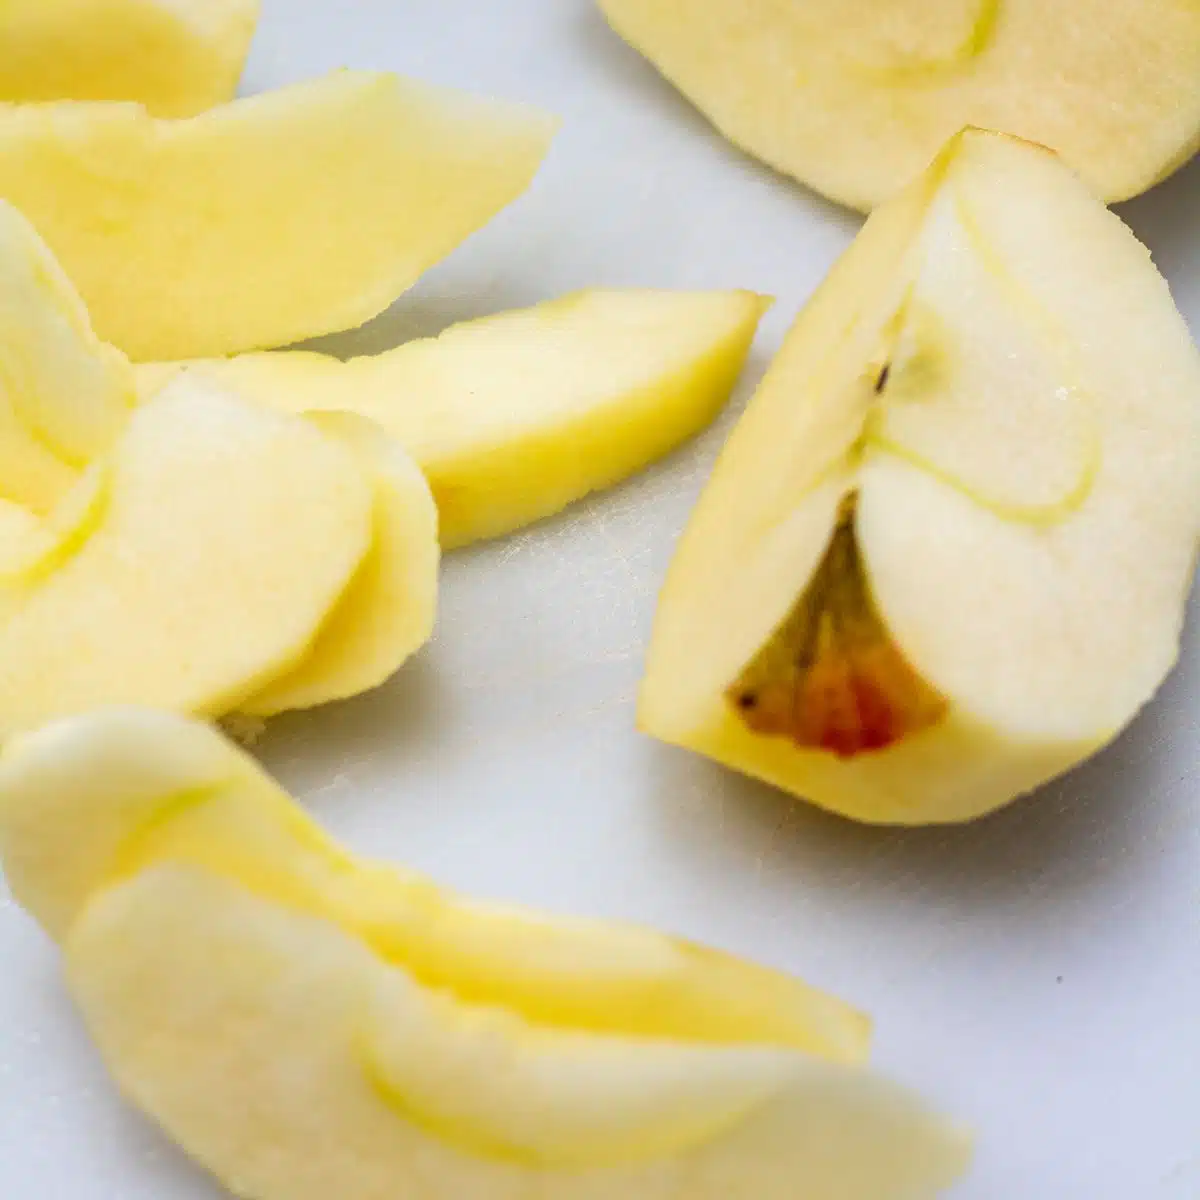 How many apples in a cup when they're sliced or diced for easy baking conversions.